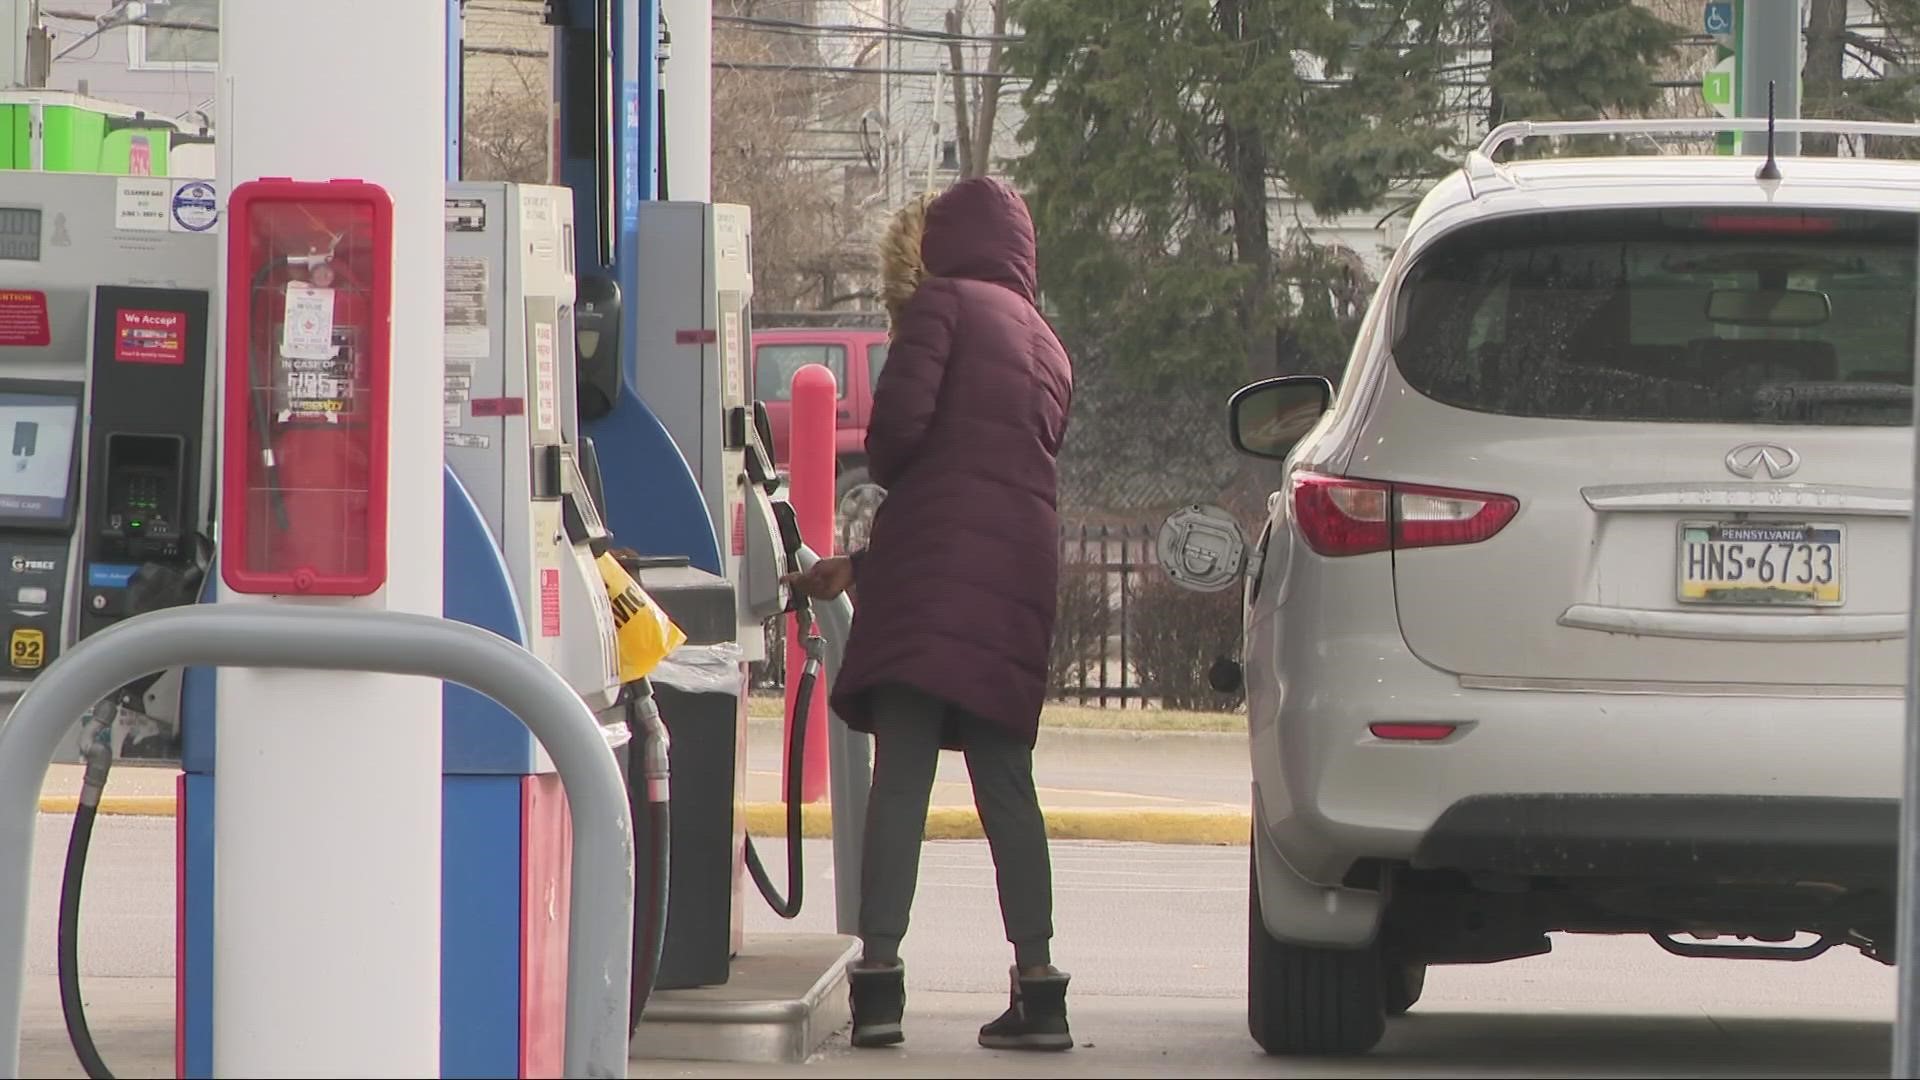 Gas prices have dropped to nearly $3 per gallon in Akron since last week.